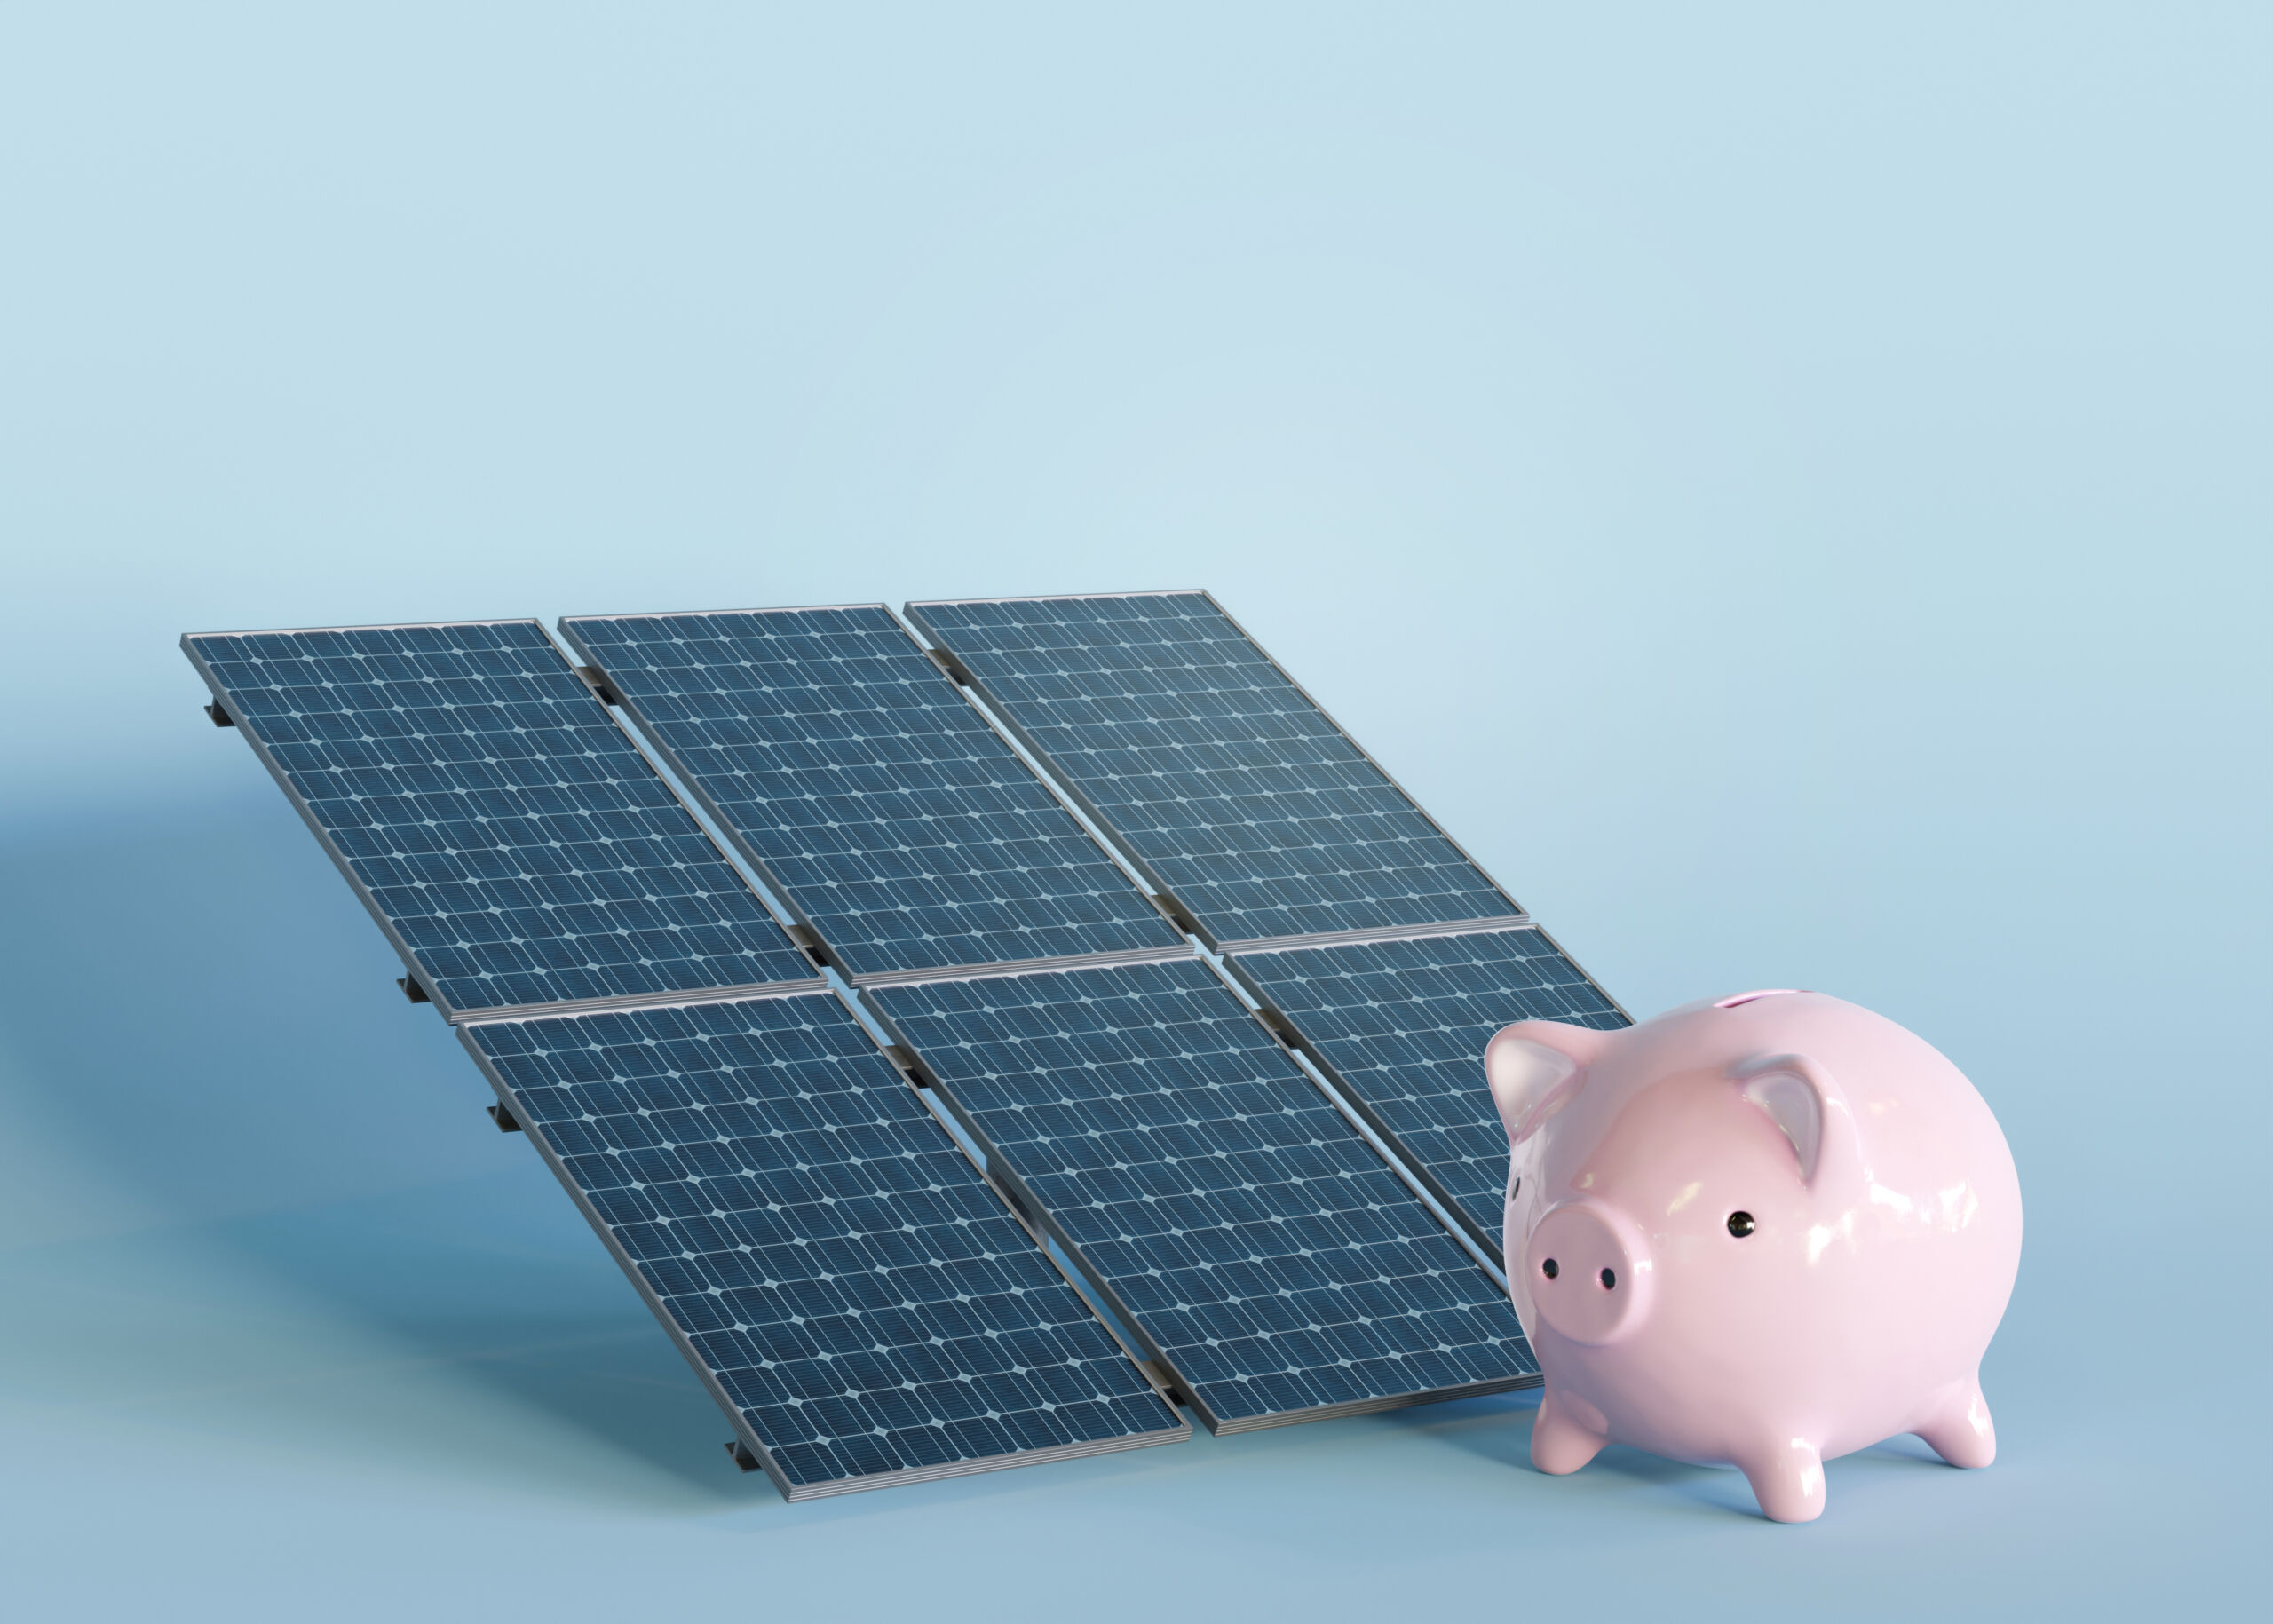 An image of solar panels next to a piggy bank, representing big savings. Is solar a scam?